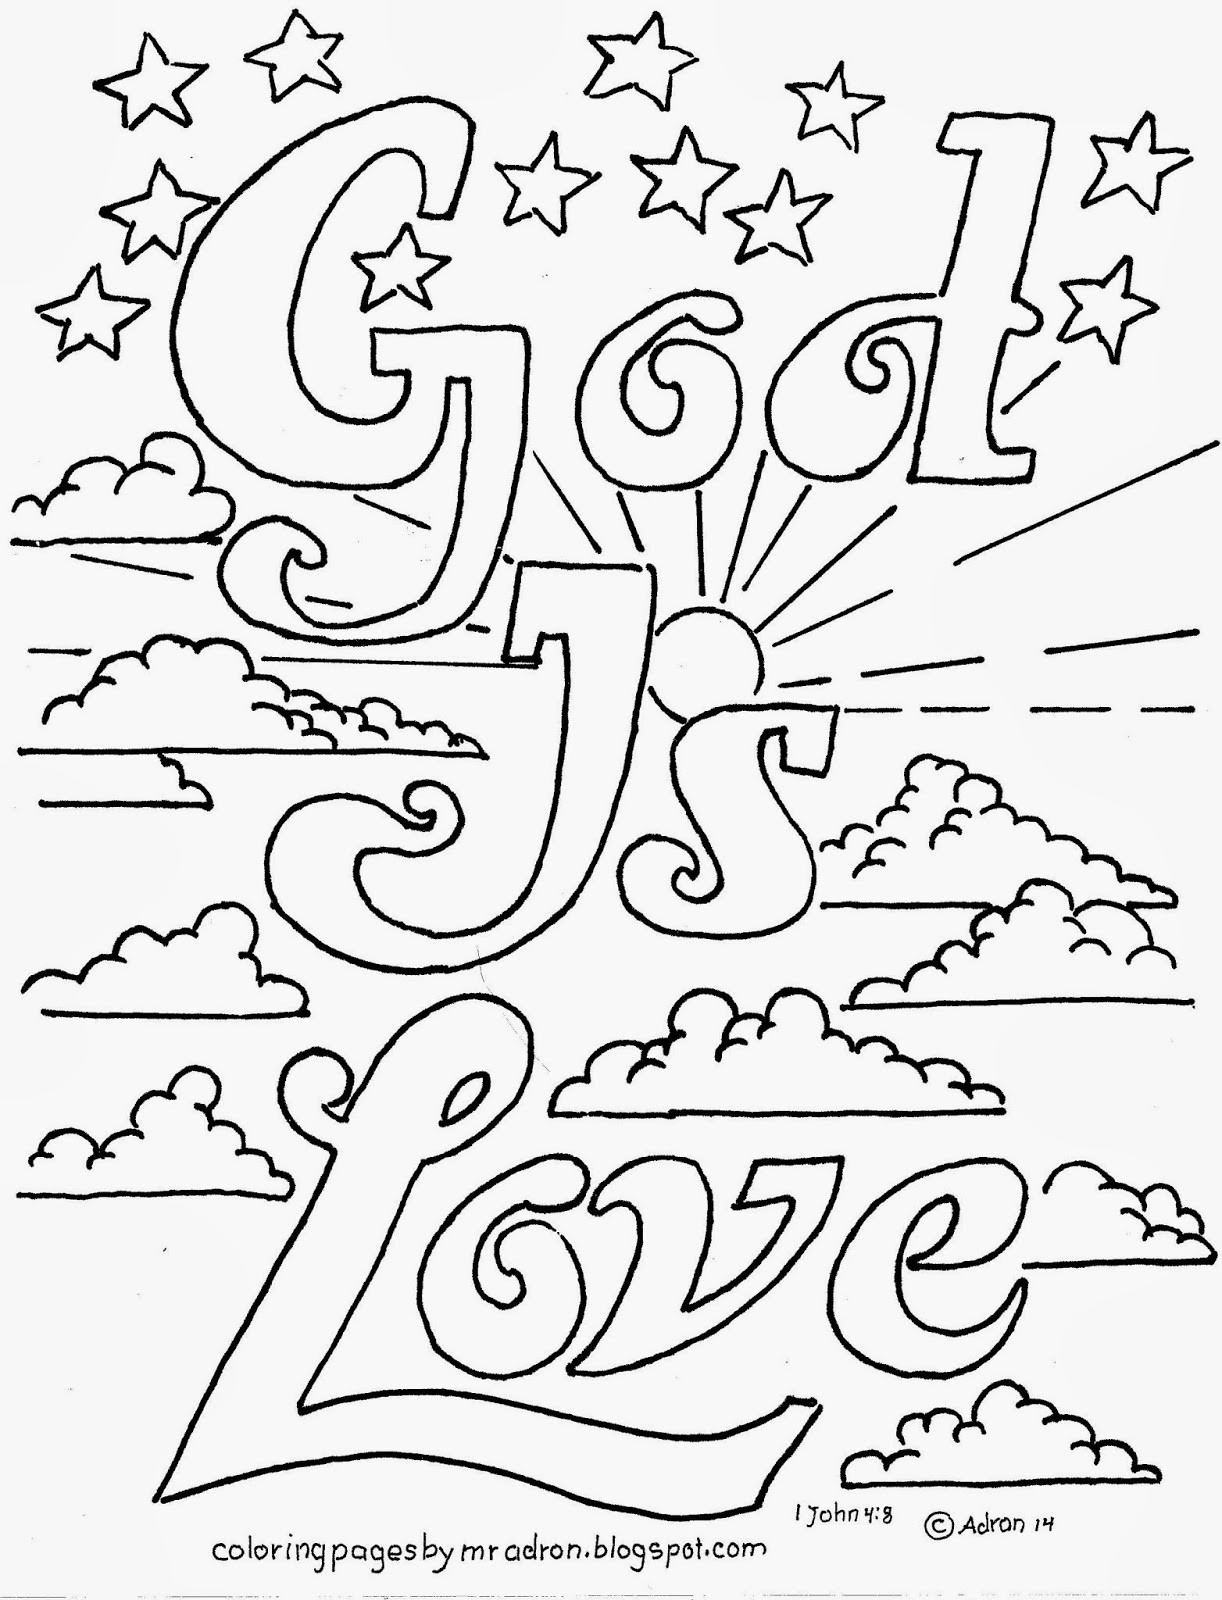 Love Coloring Pages For Kids
 Coloring Pages for Kids by Mr Adron God Is Love